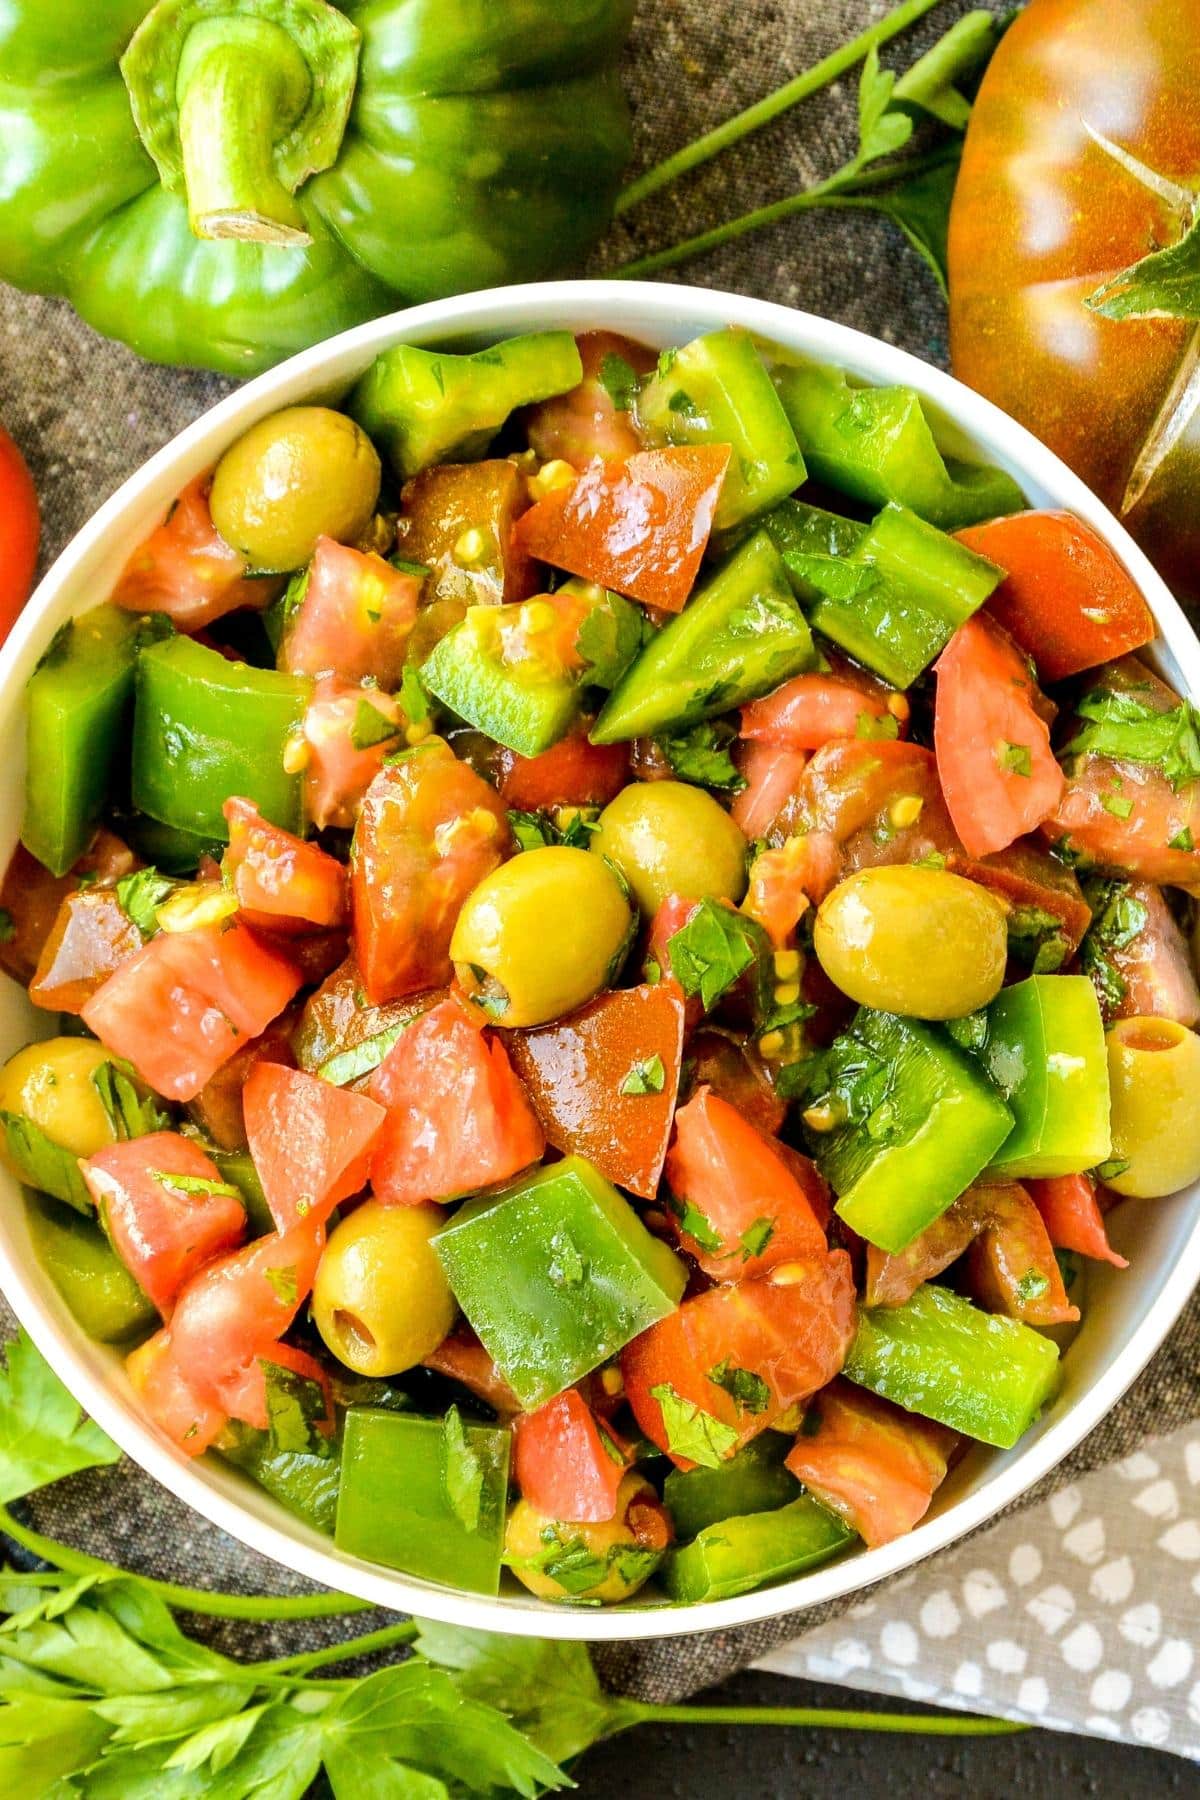 Overhead of a bowl of salad made with diced green bell peppers, heirloom tomatoes, green olives, and fresh parsley.